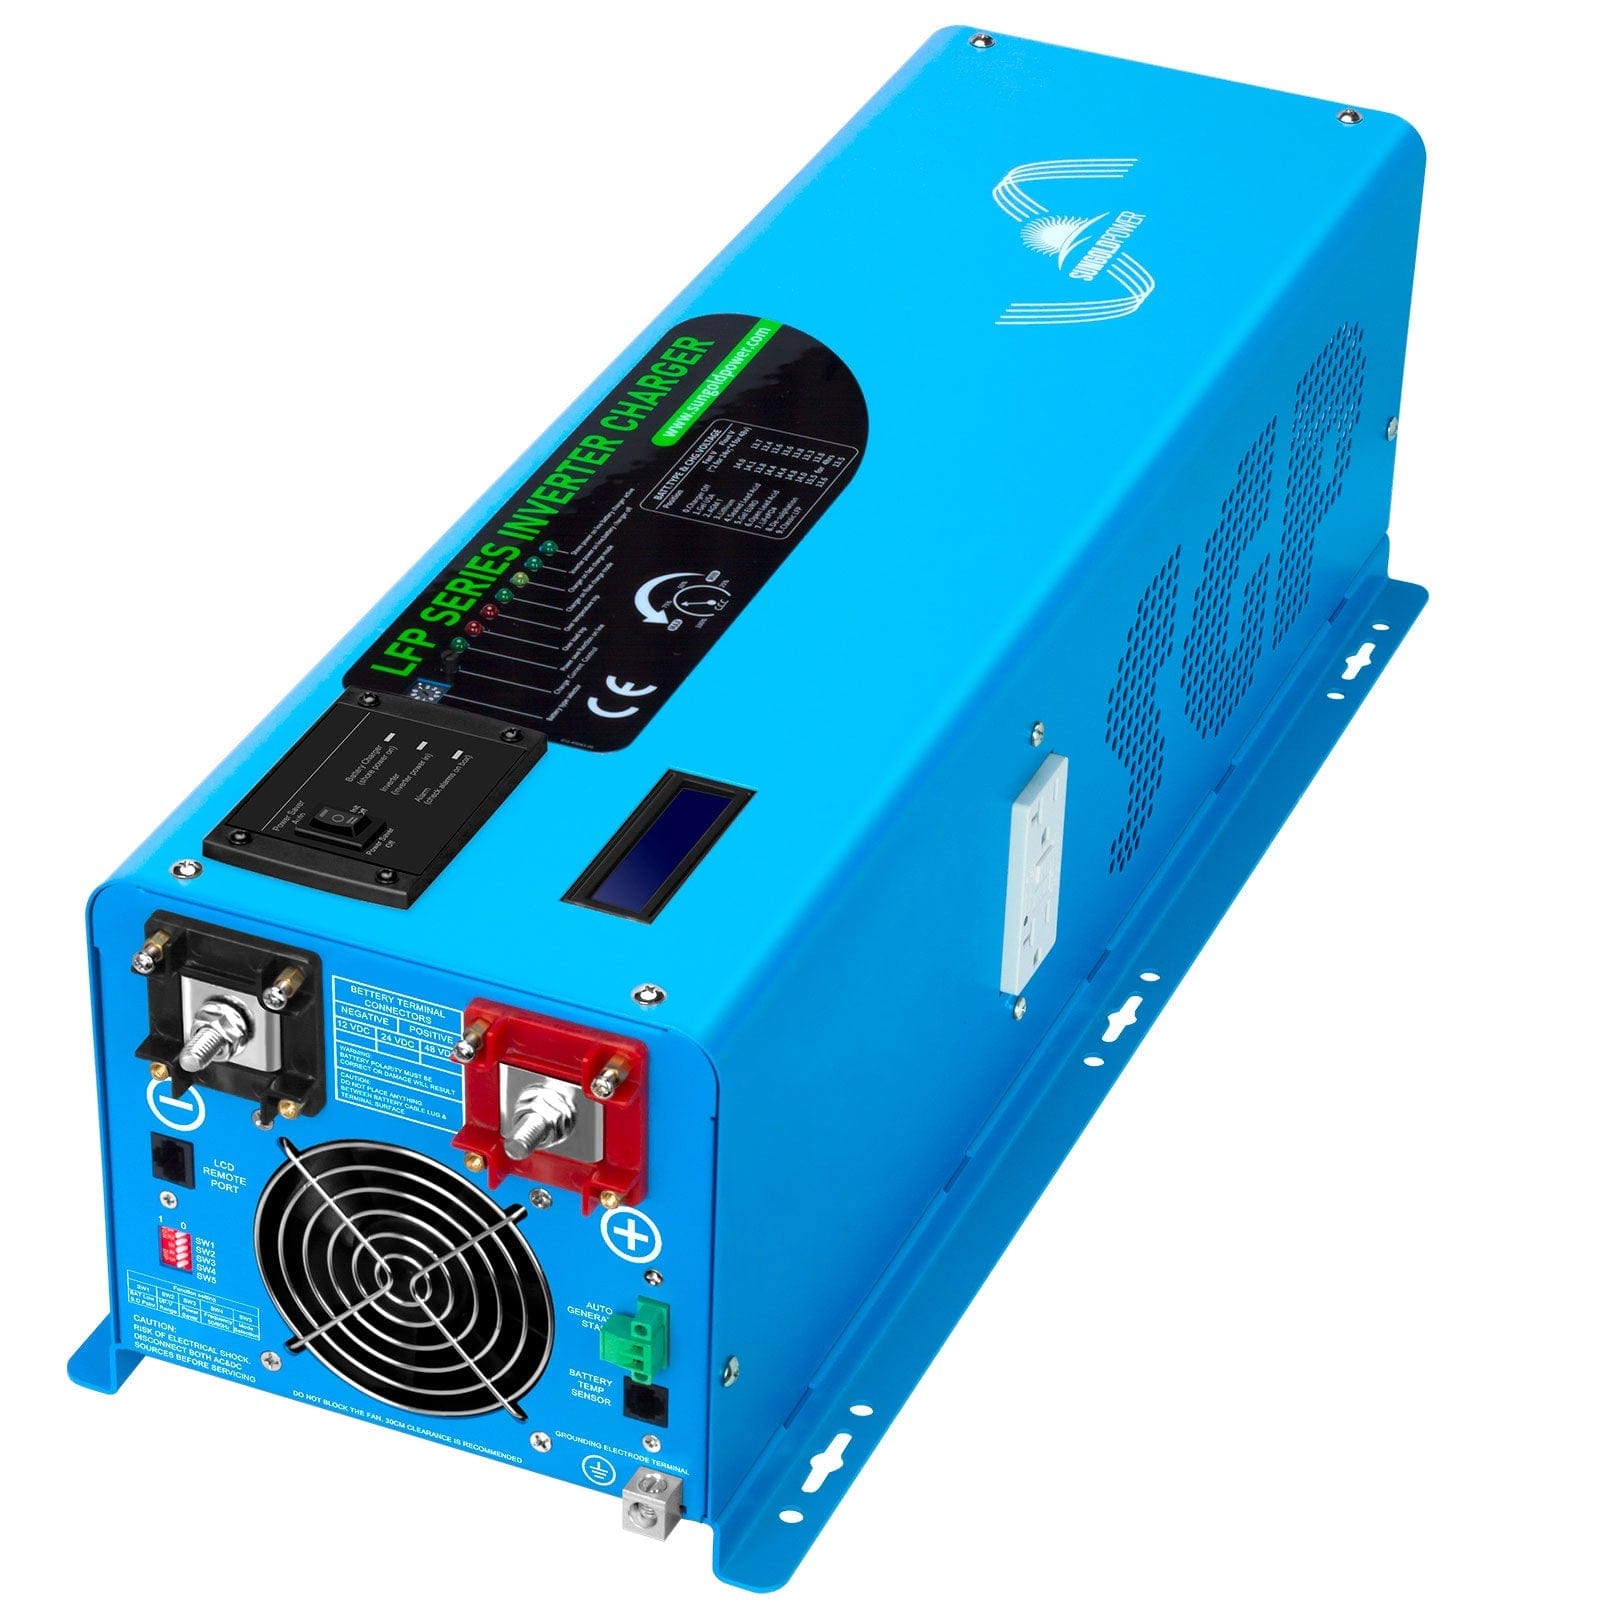 4000W DC 12V Pure Sine Wave Inverter With Charger SunGoldPower 120V / 120V / Only Inverter Pure Sine Wave Inverter With Charger